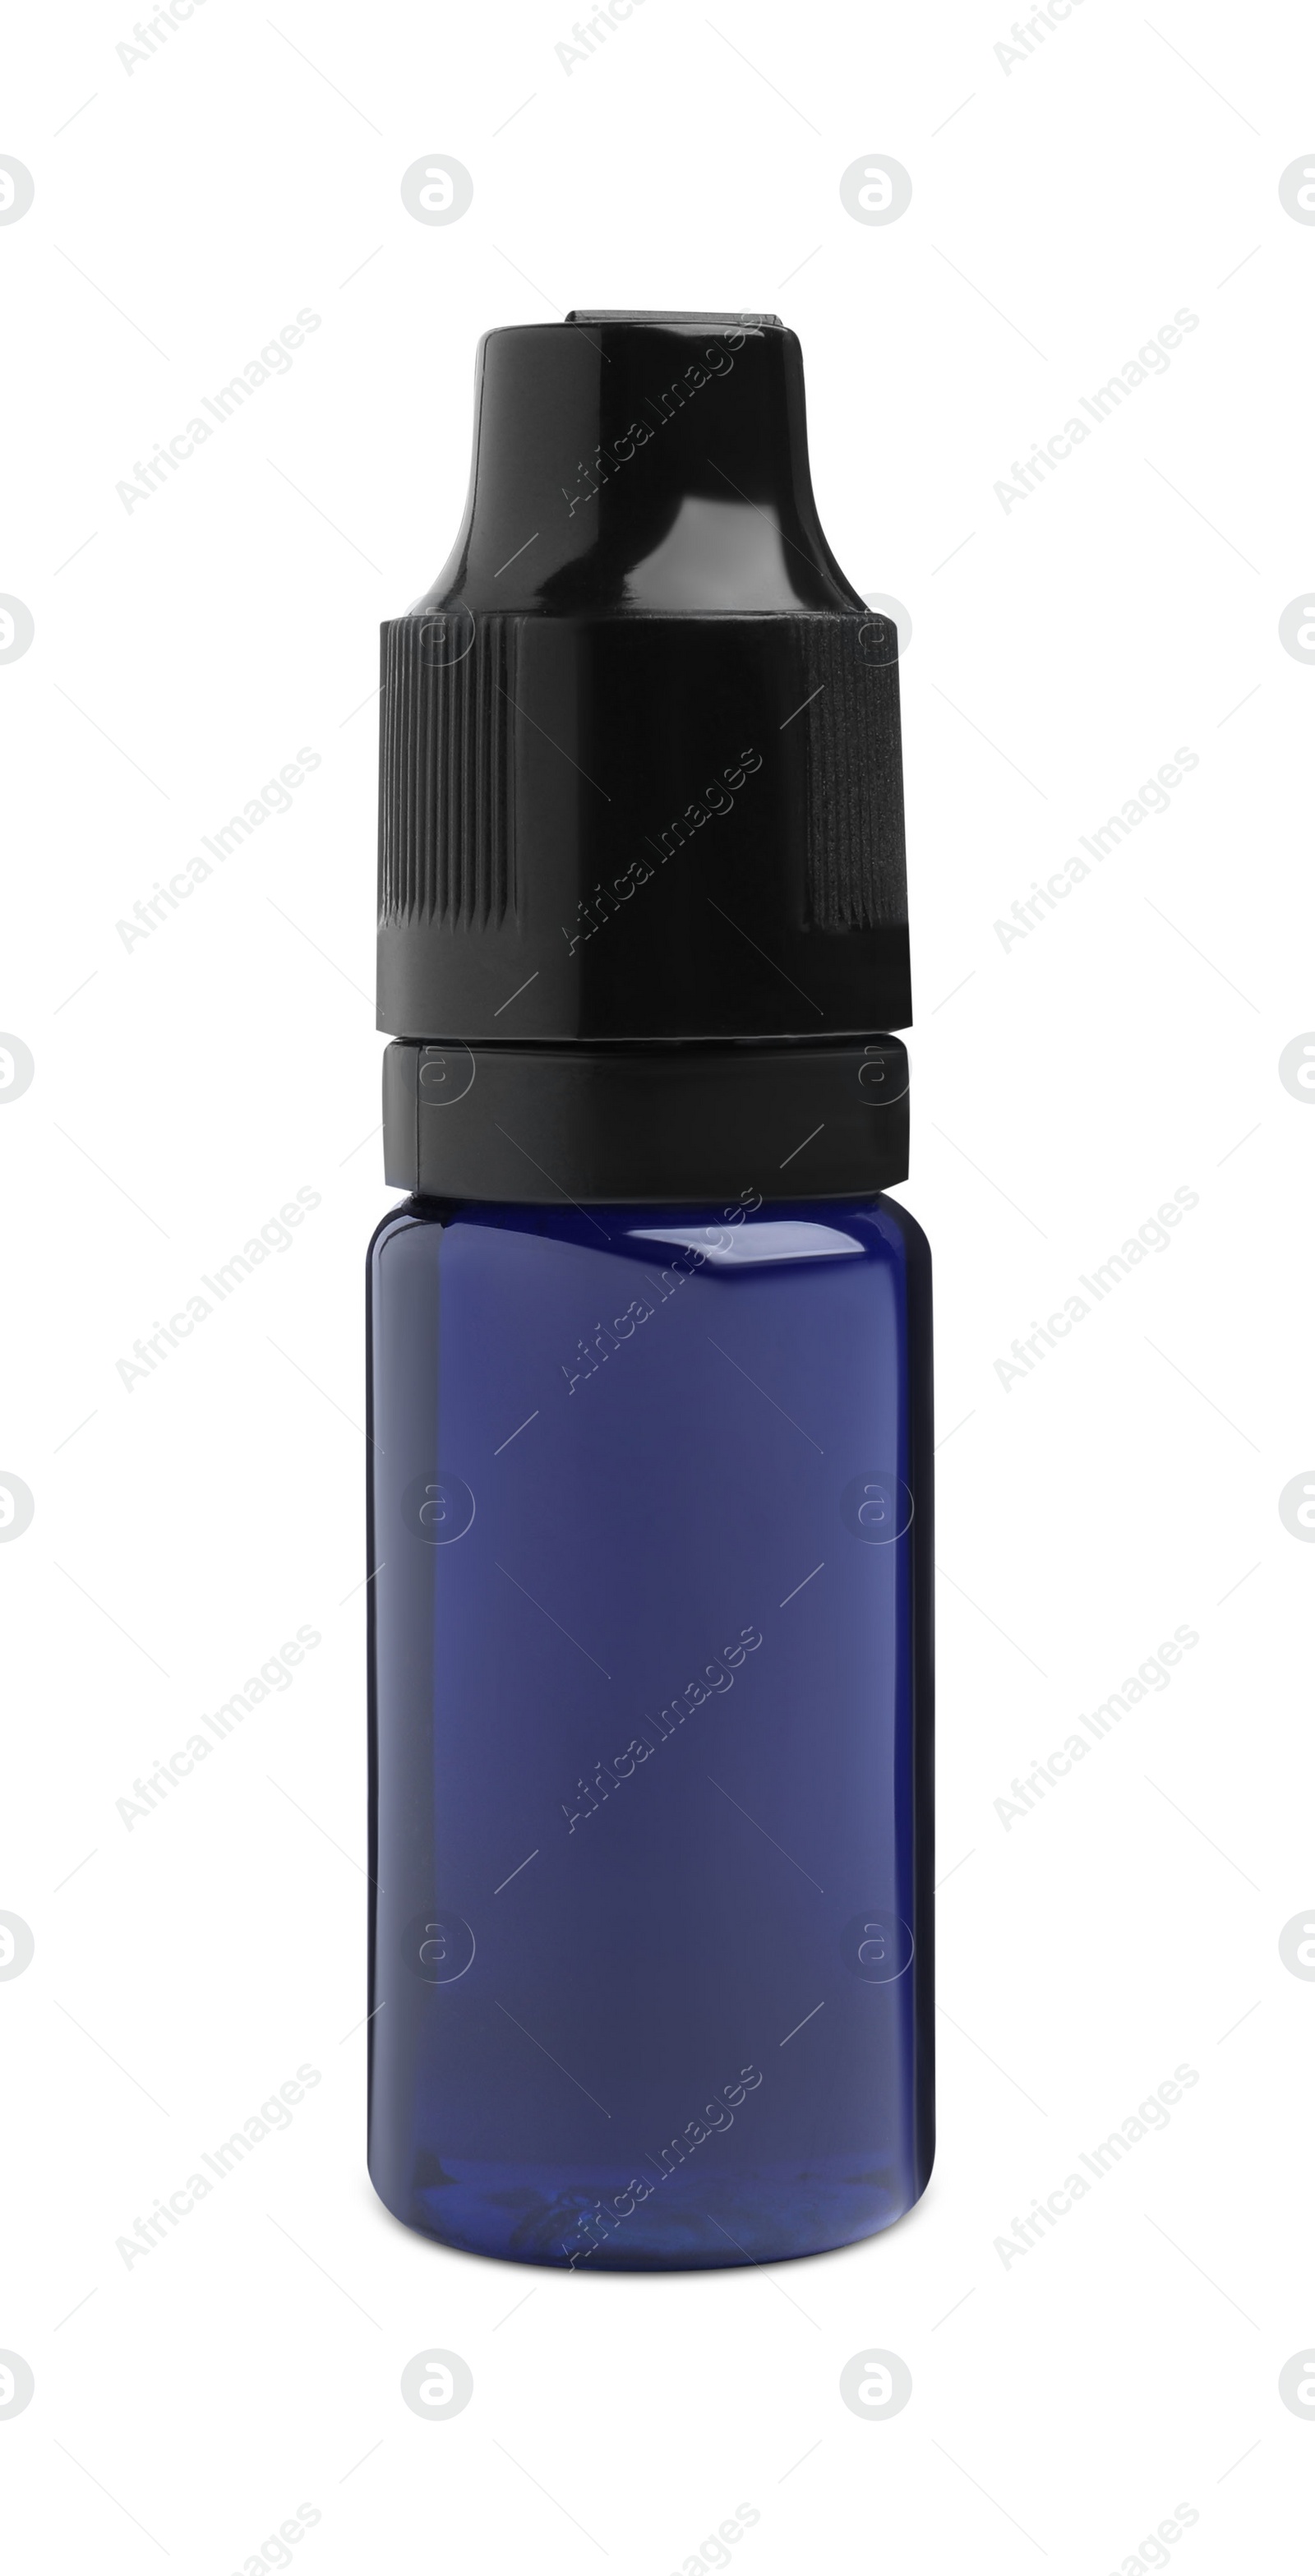 Photo of Bottle of blue food coloring isolated on white